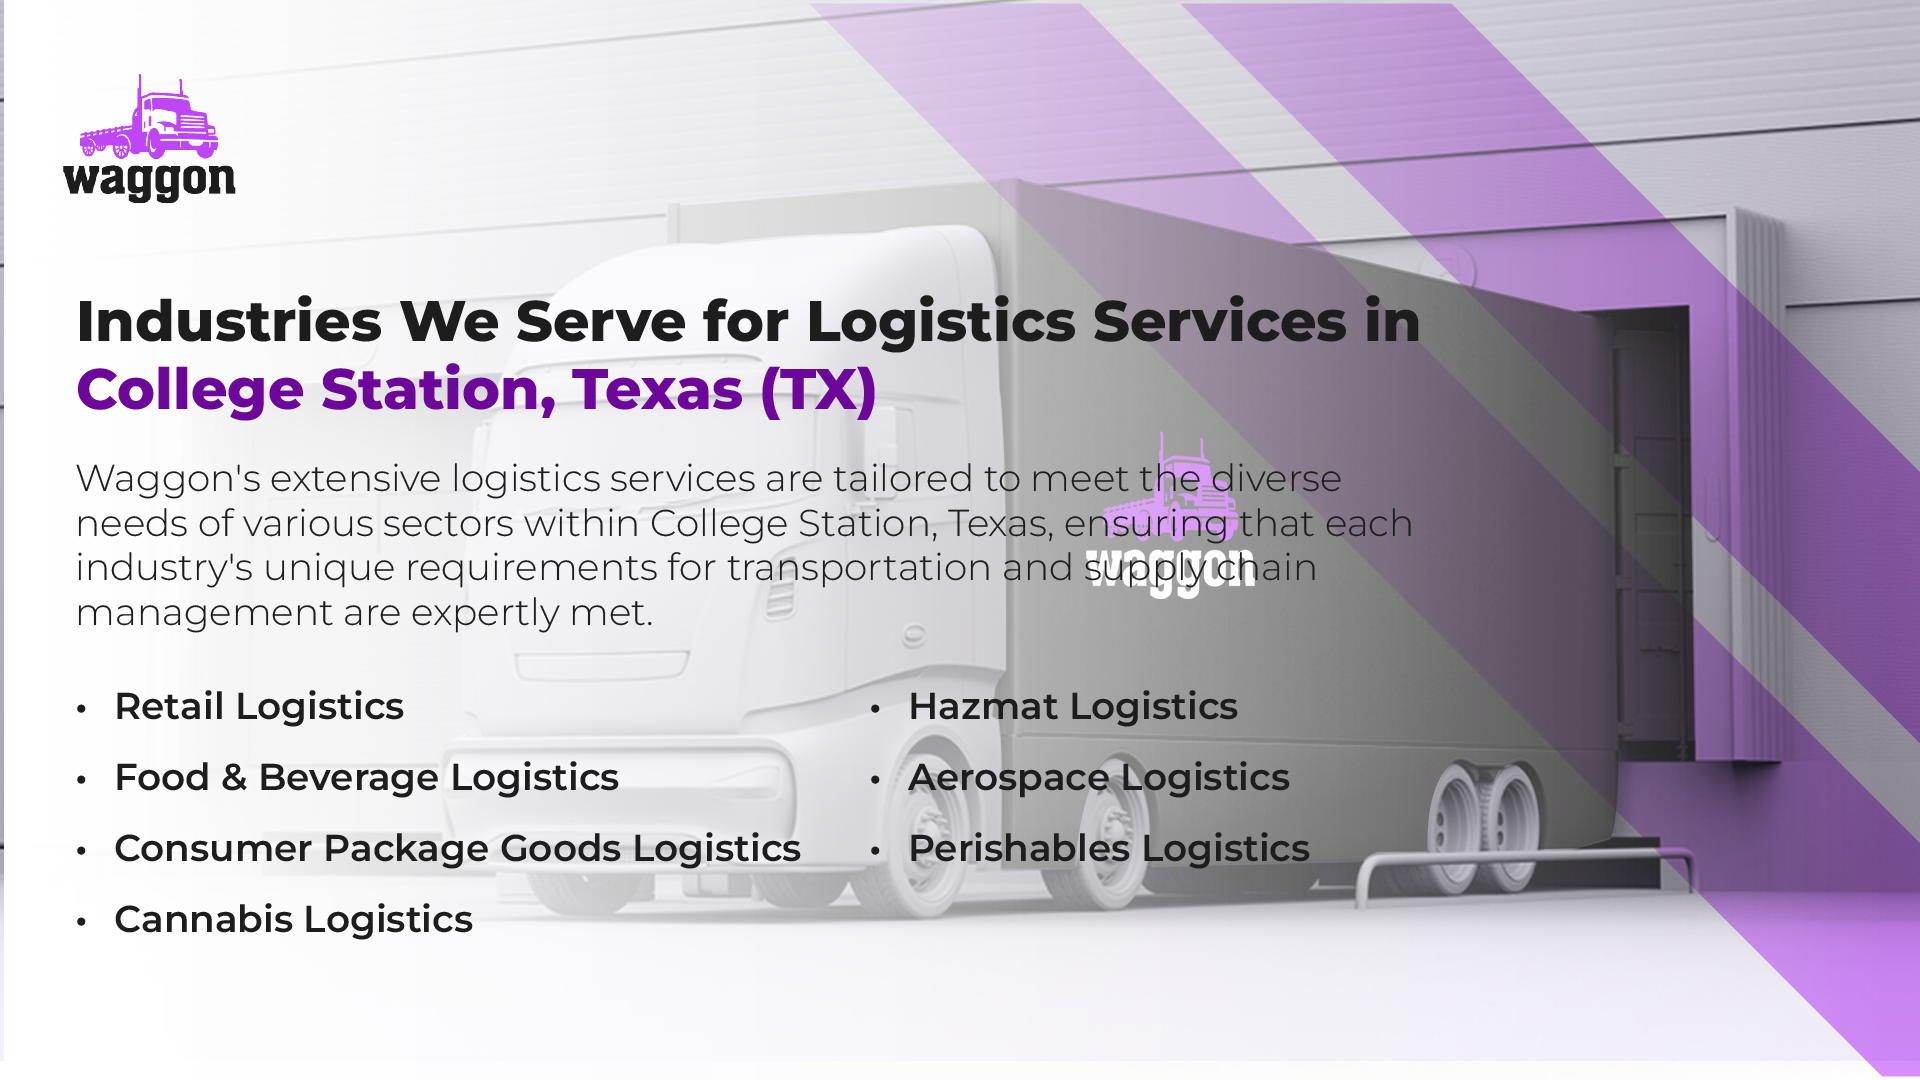 Industries We Serve for Logistics Services in College Station, Texas (TX)